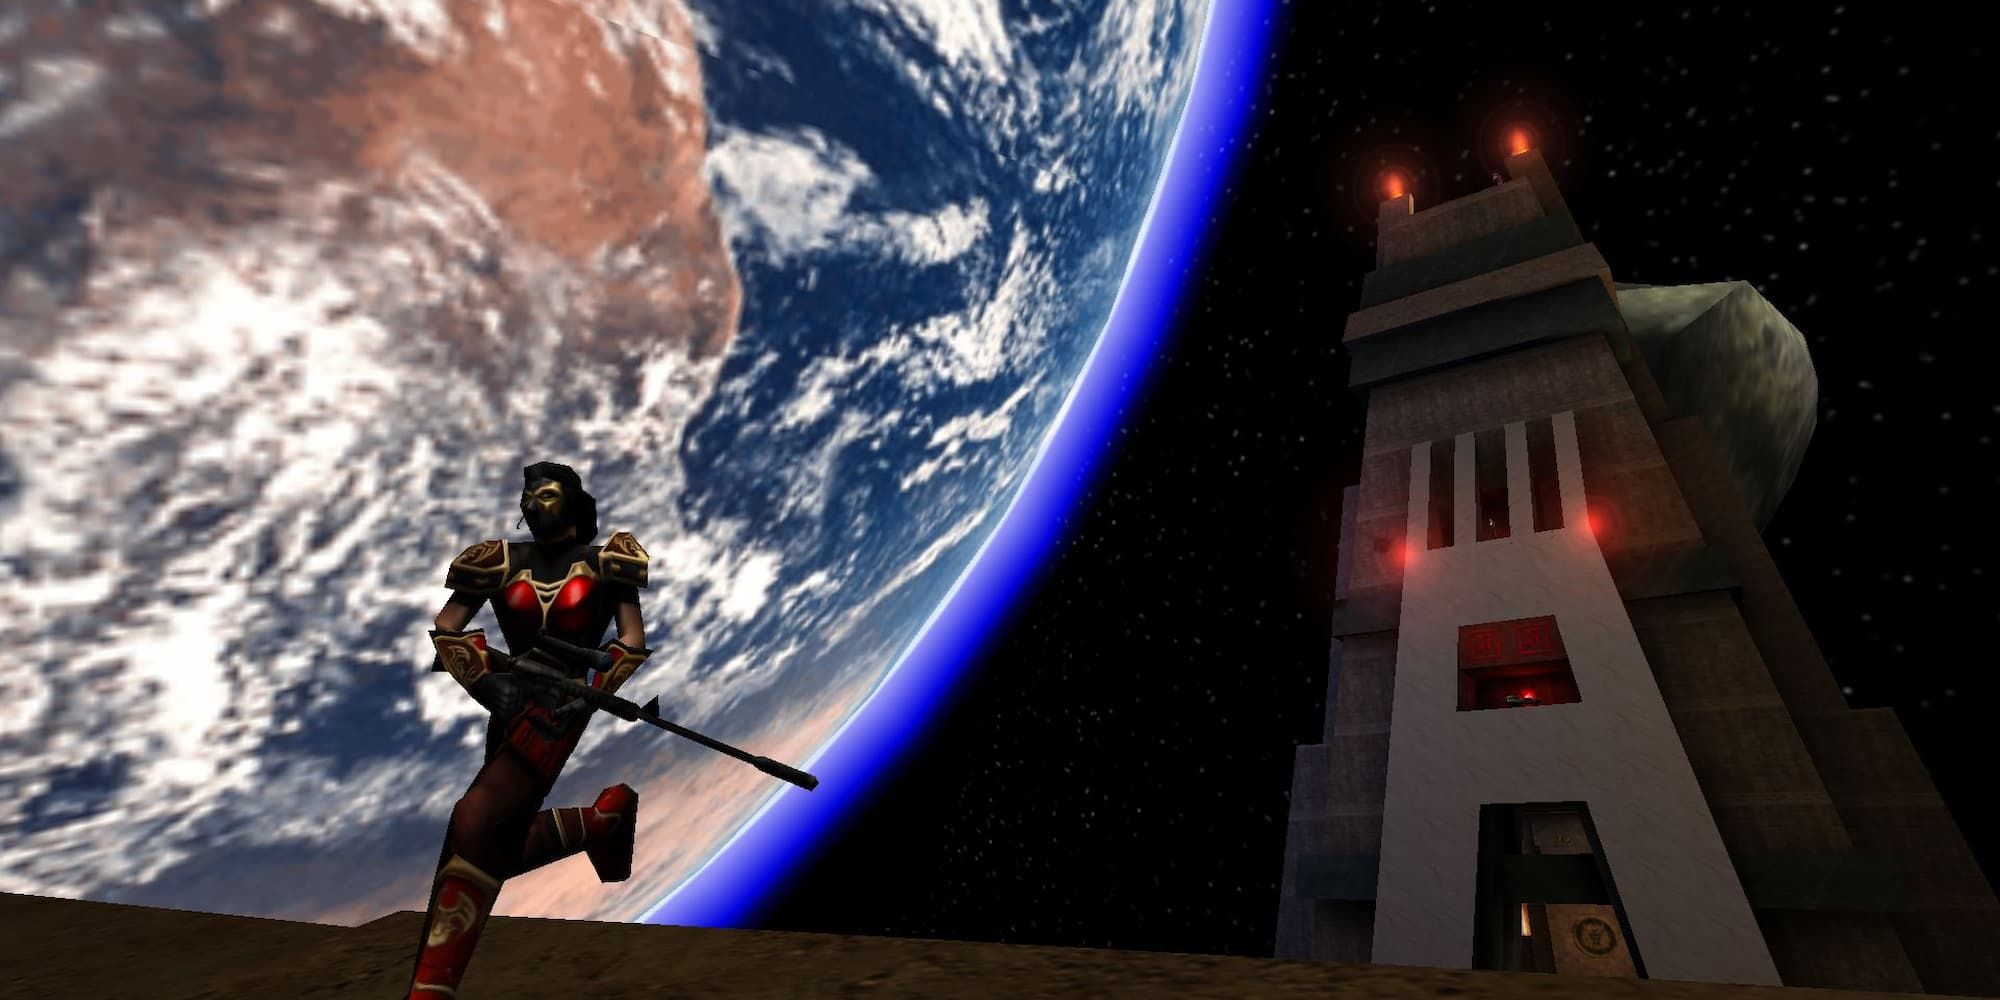 A soldier runs from the tower on the Facing Worlds map of Unreal Tournament.